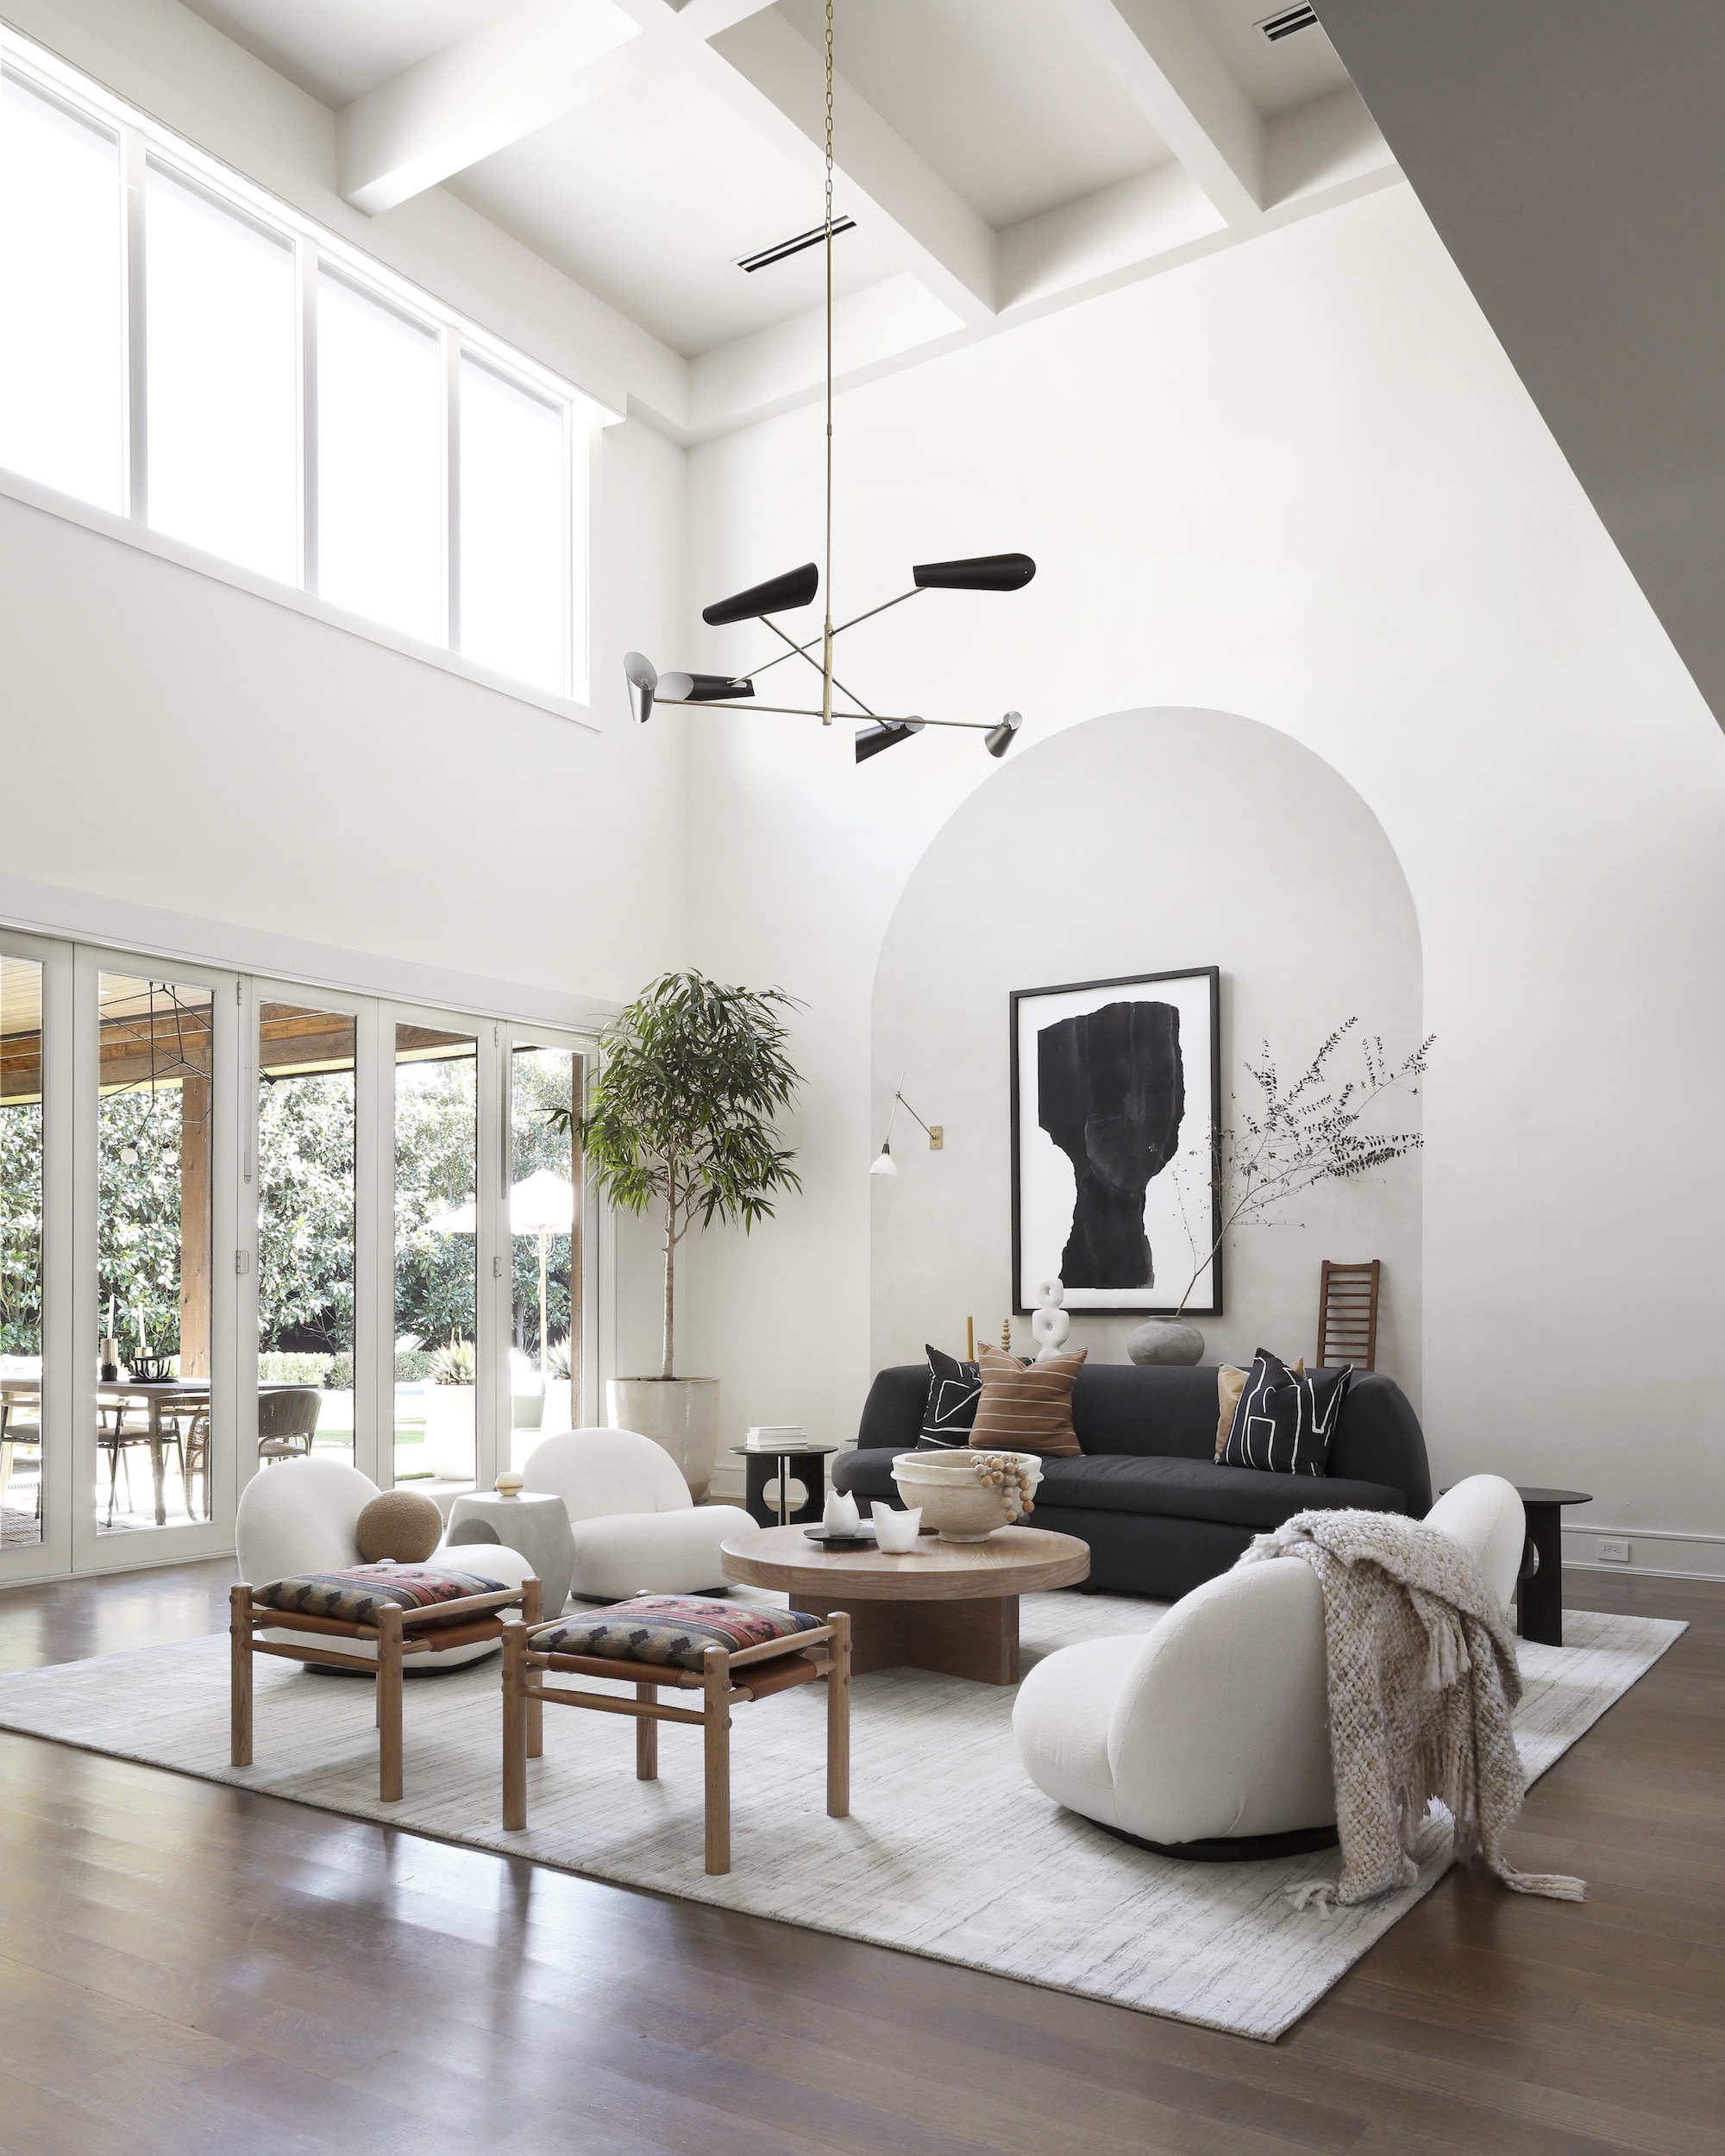 Vaulted Ceiling Lighting Ideas for Every Style